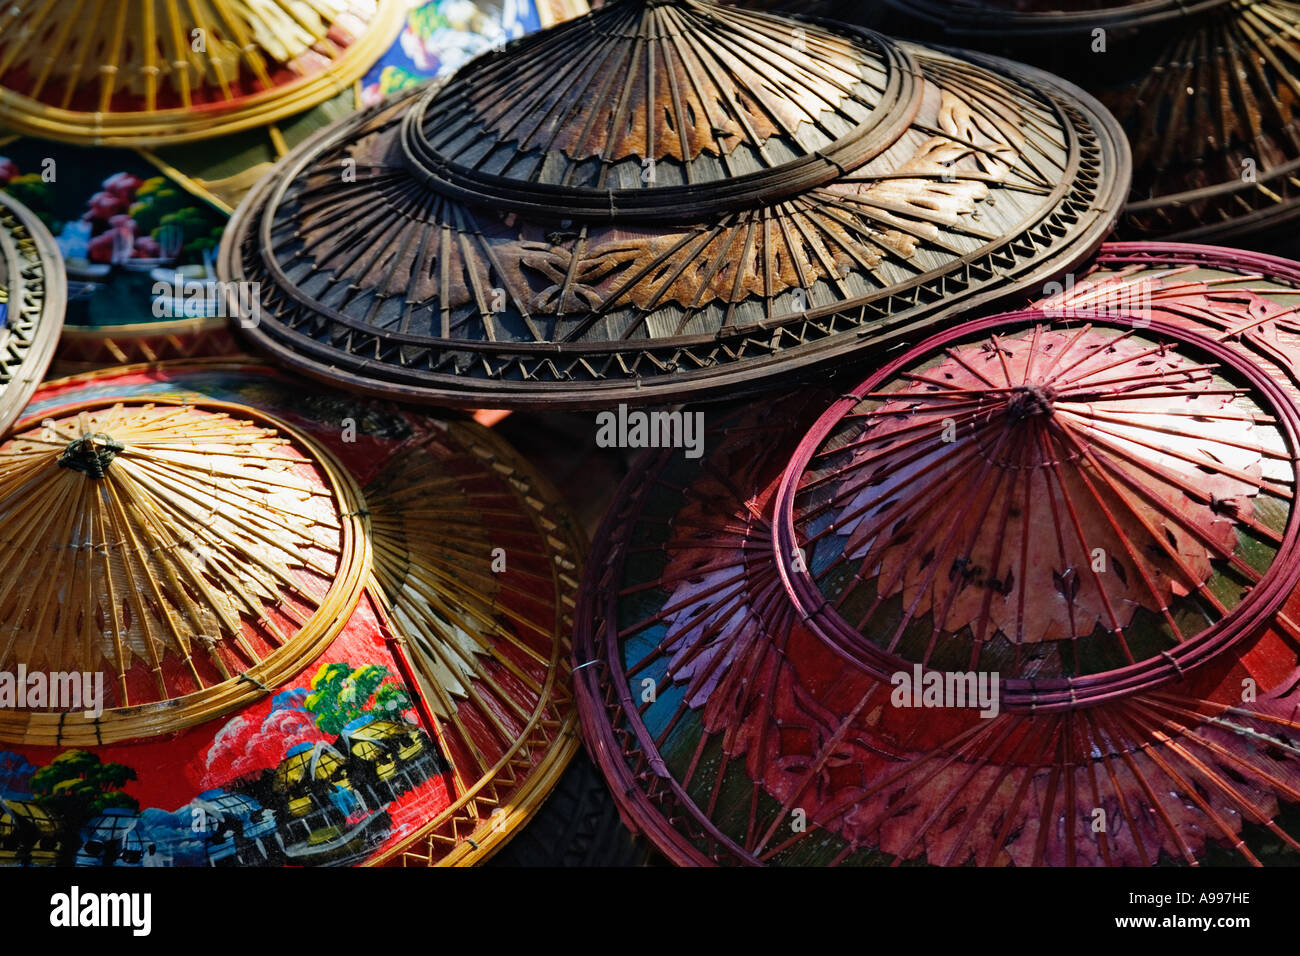 Thai Hats Sale Thailand High Resolution Stock Photography and Images - Alamy